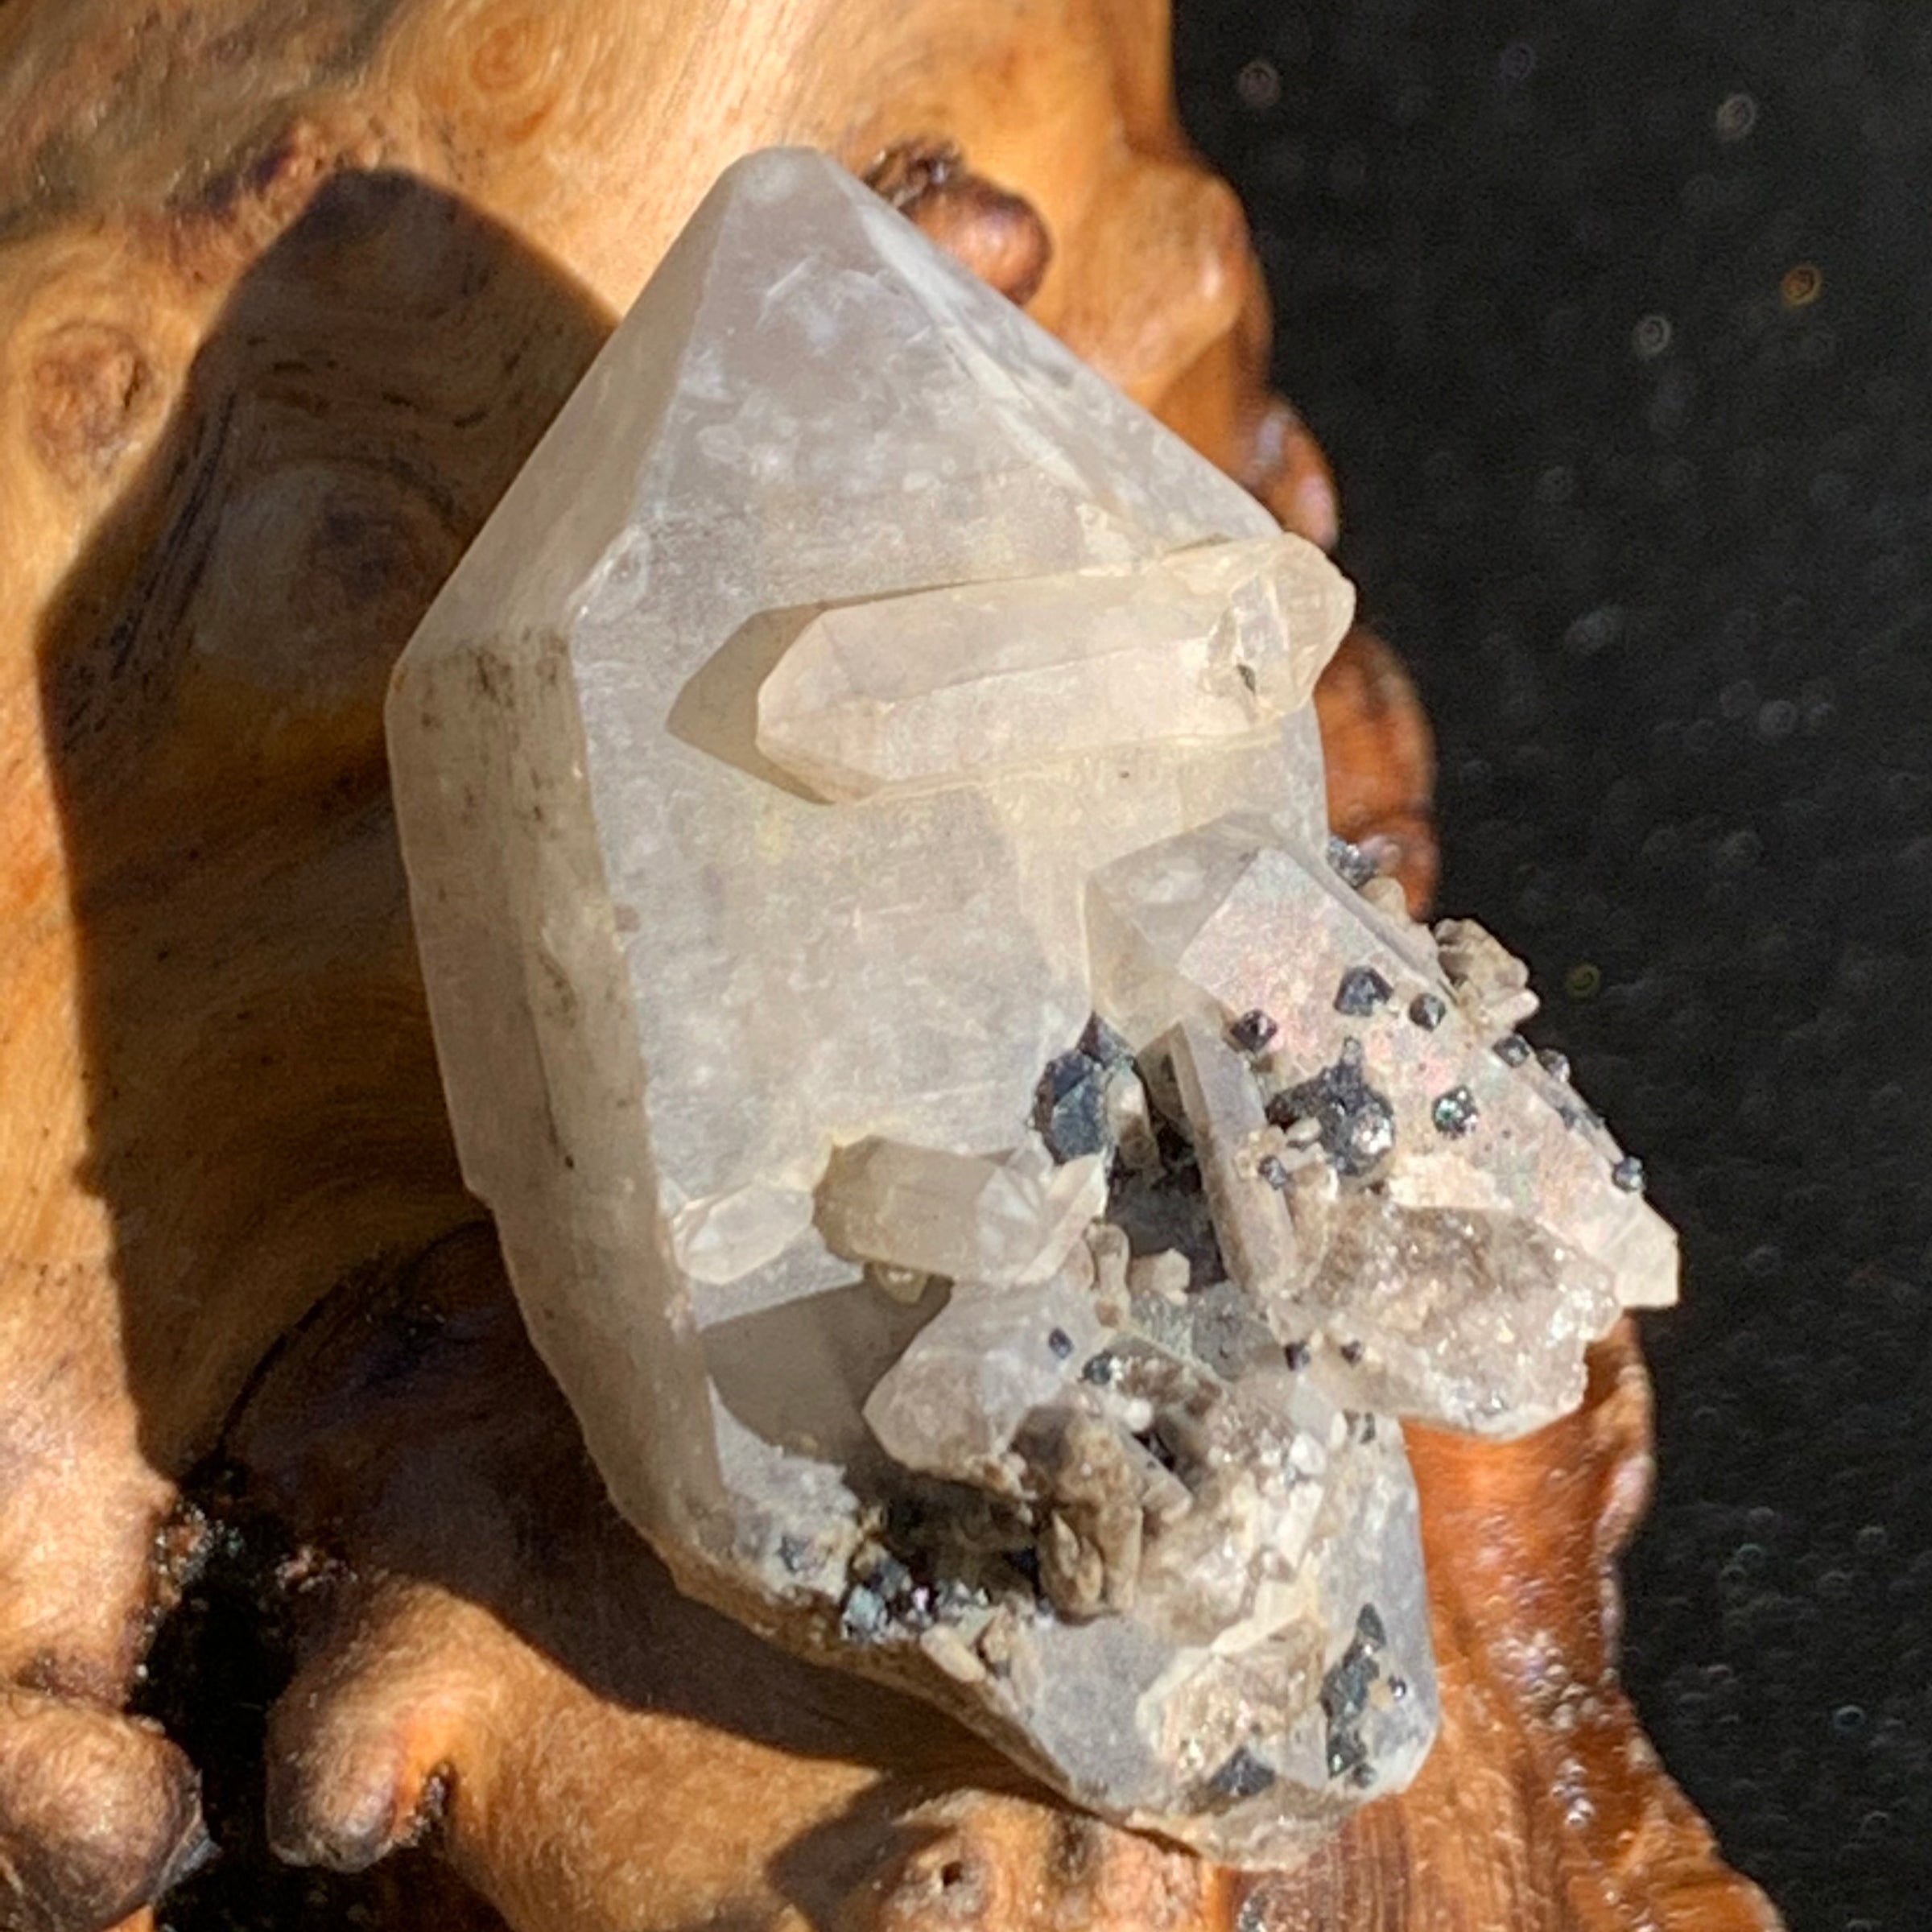 tiny, small, and medium brookite crystals on a smokey quartz point cluster sitting on driftwood for display